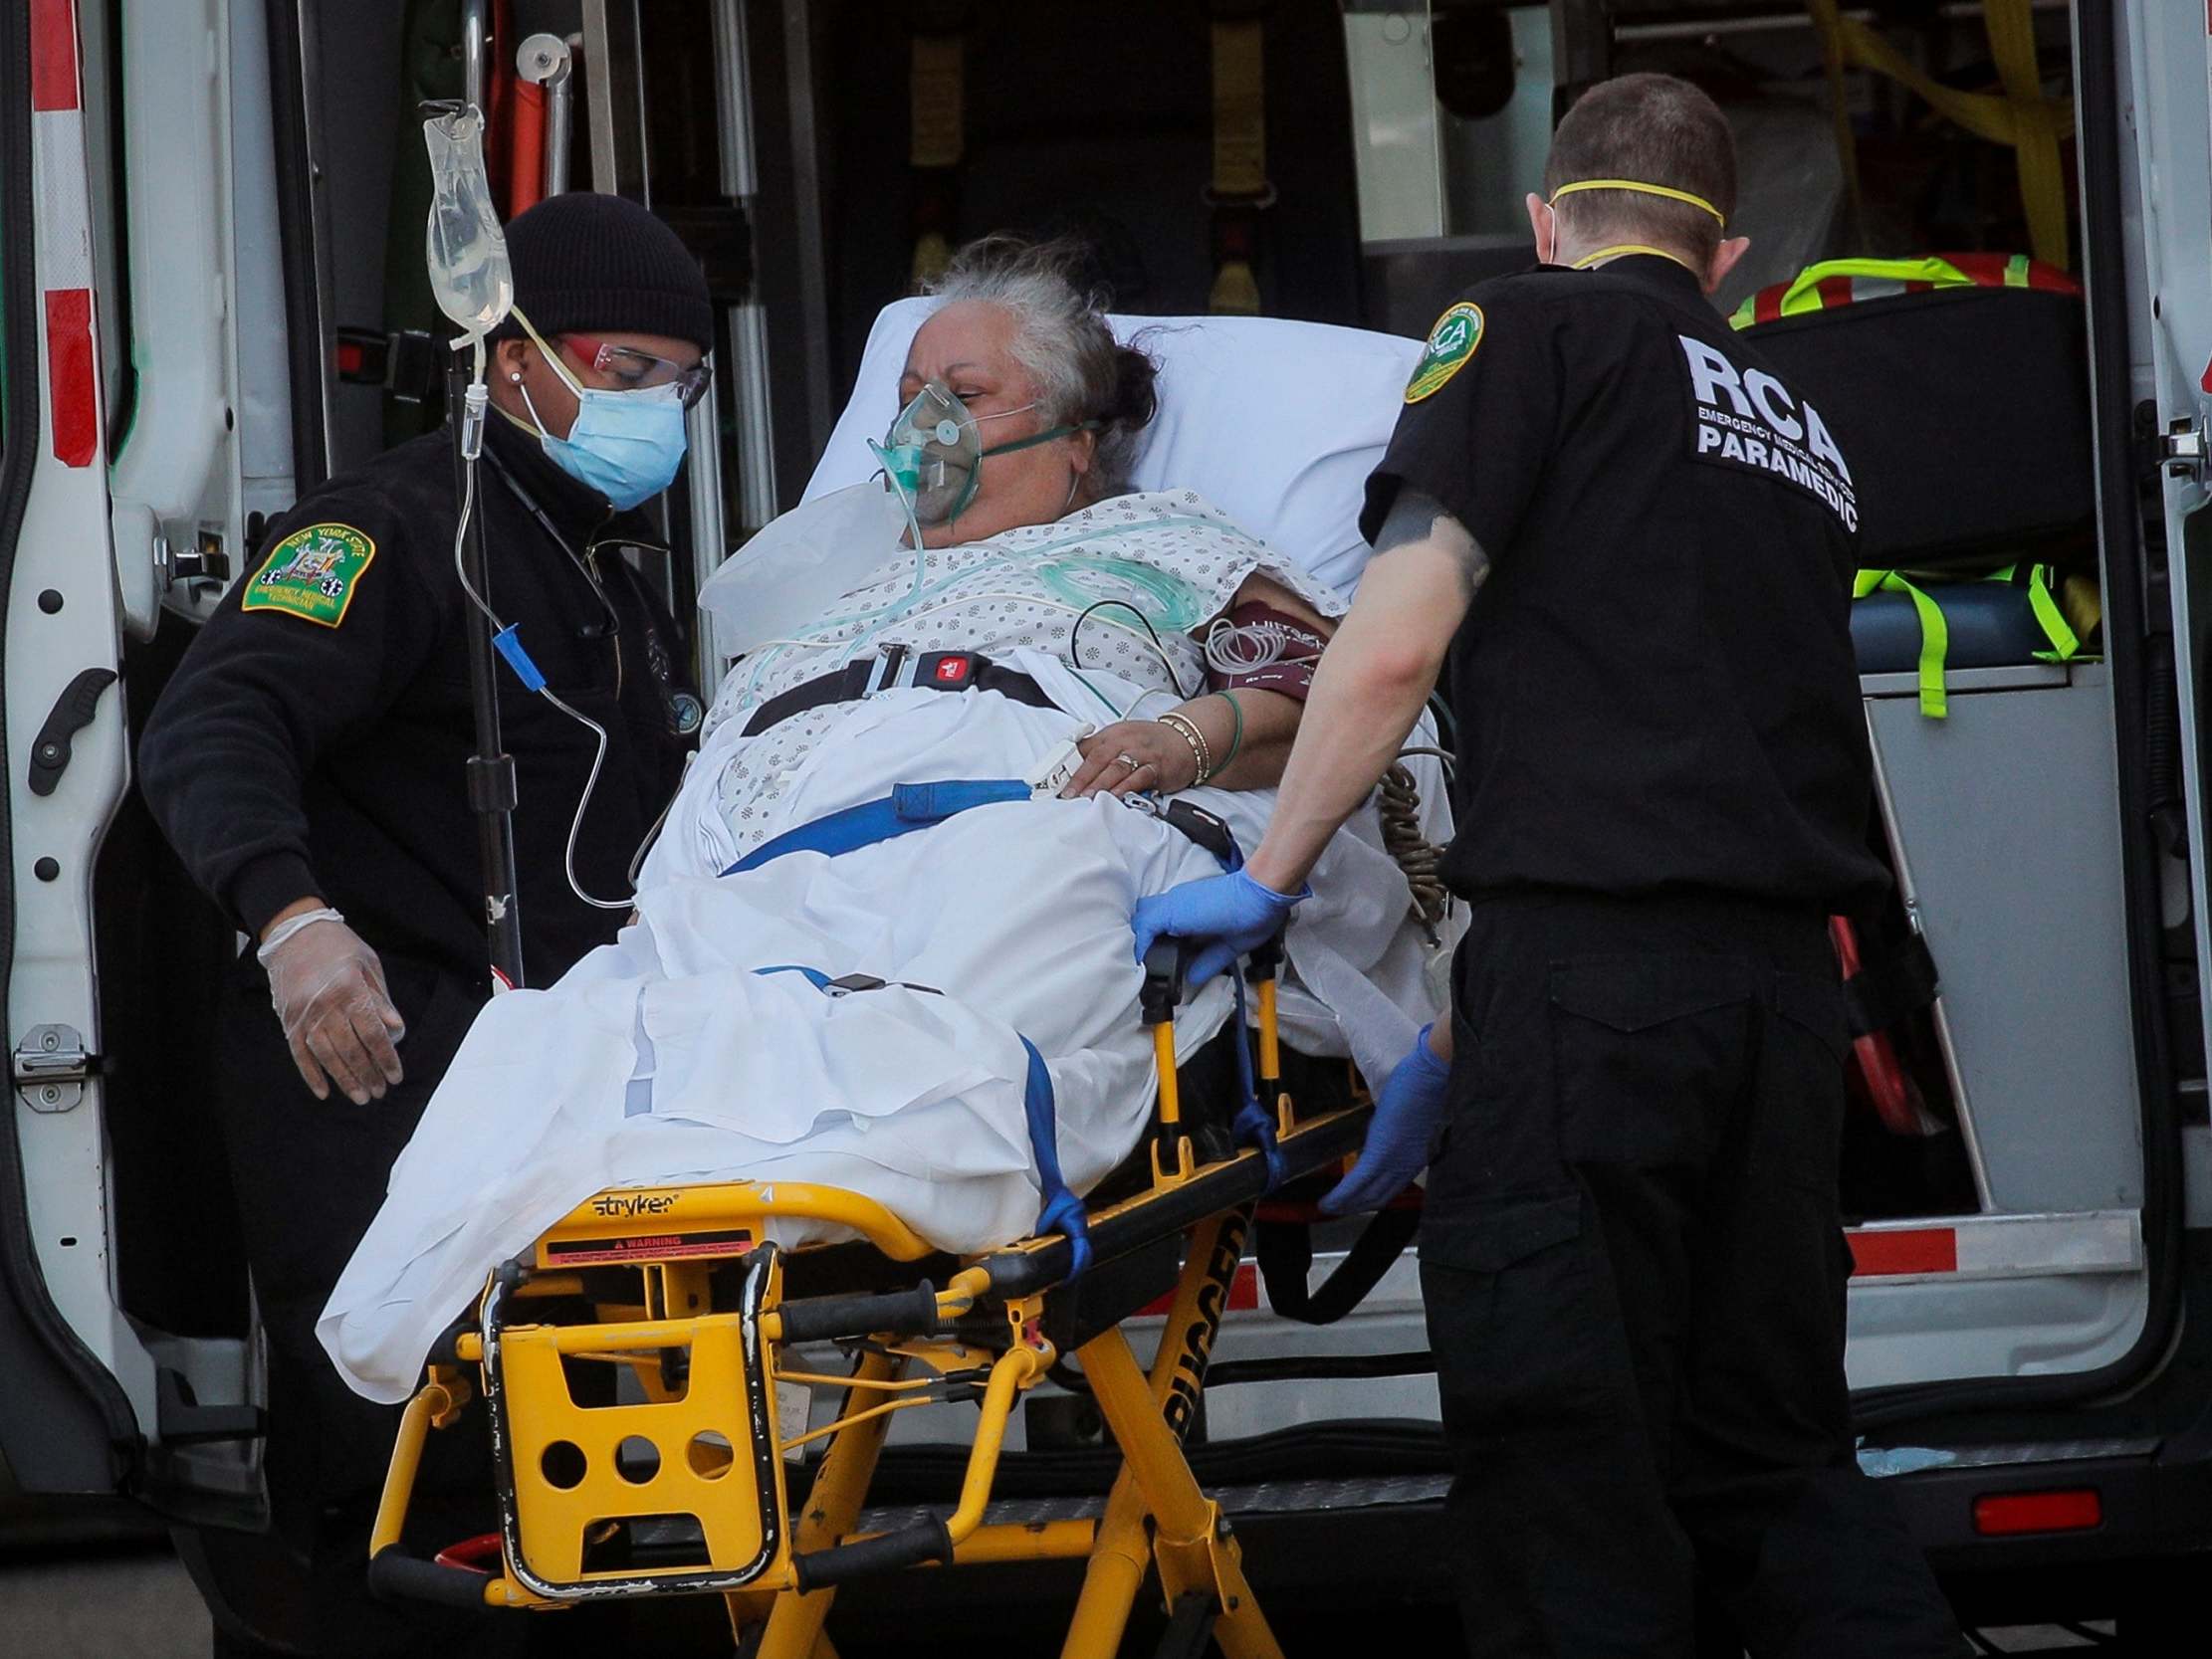 A woman is loaded into an ambulance by paramedics Chateau at Brooklyn Rehabilitation & Nursing Centre during the outbreak of coronavirus in the Brooklyn borough of New York, US, 14 April 2020.